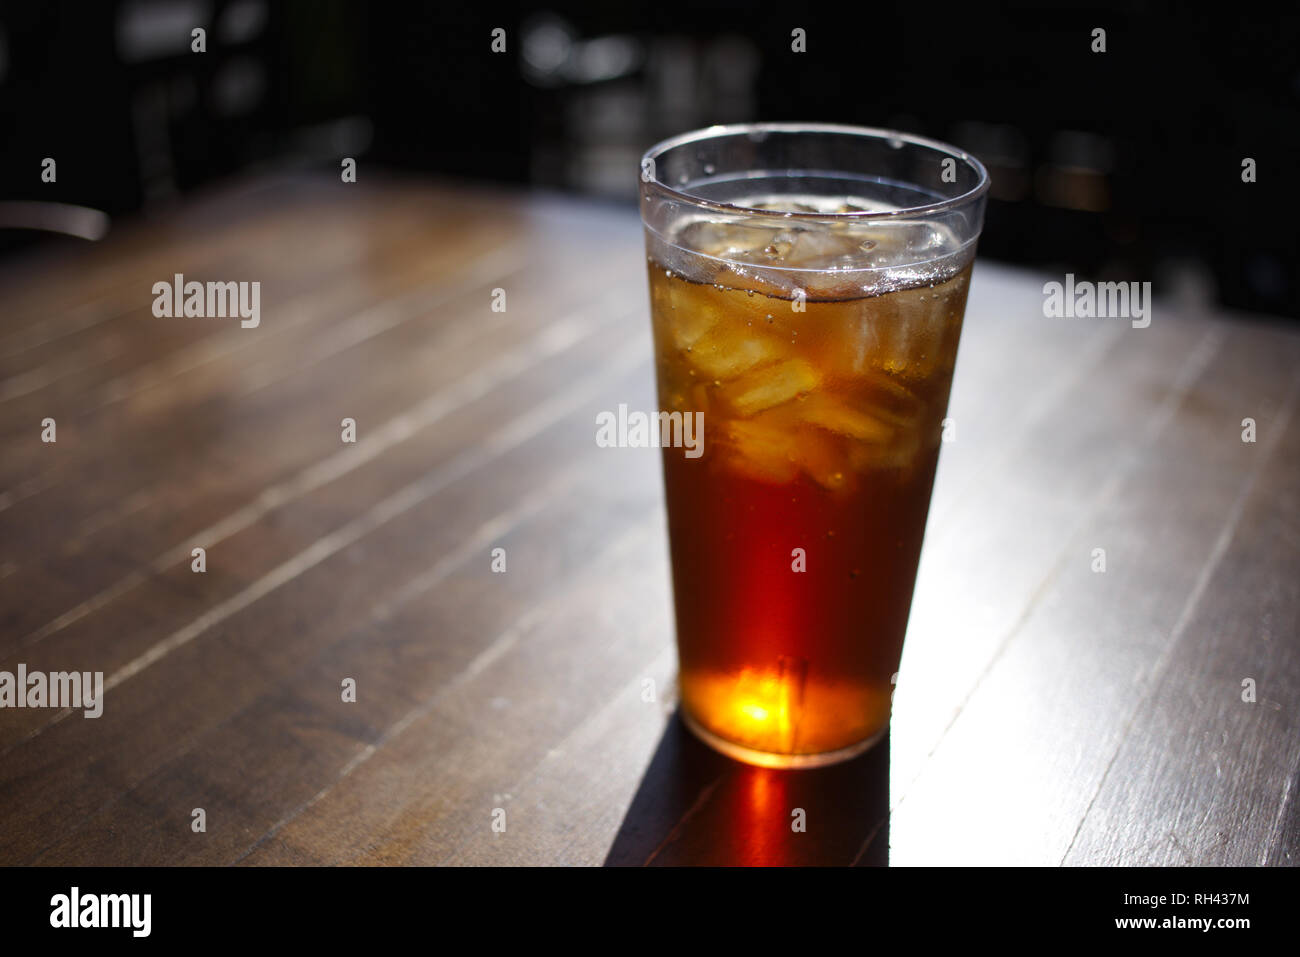 Simply refreshing - A glass of iced tea ordered at a sidewalk cafe in Downtown Huntington Beach, CA Stock Photo